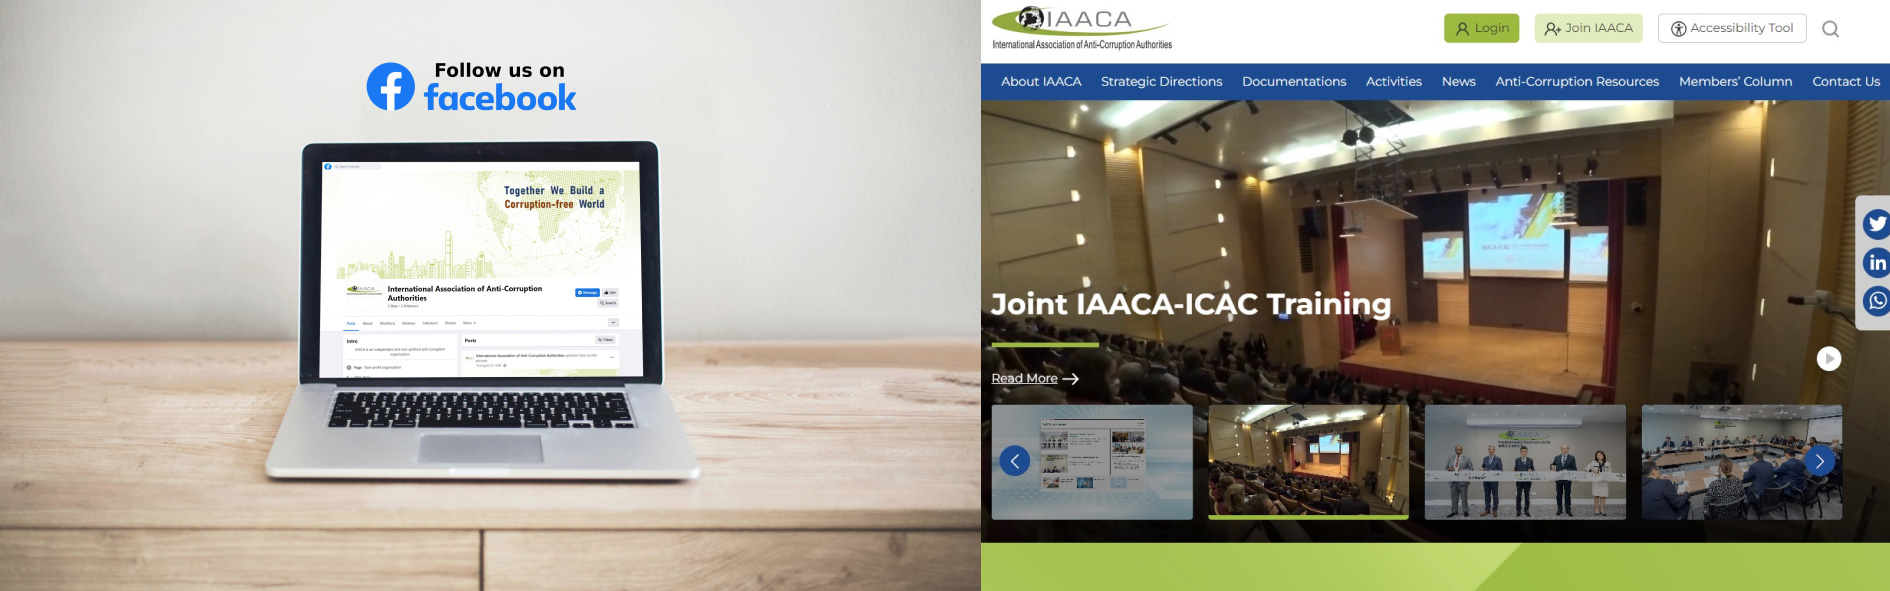 The IAACA website and the new official Facebook page help enhance online activities and the exchange of information